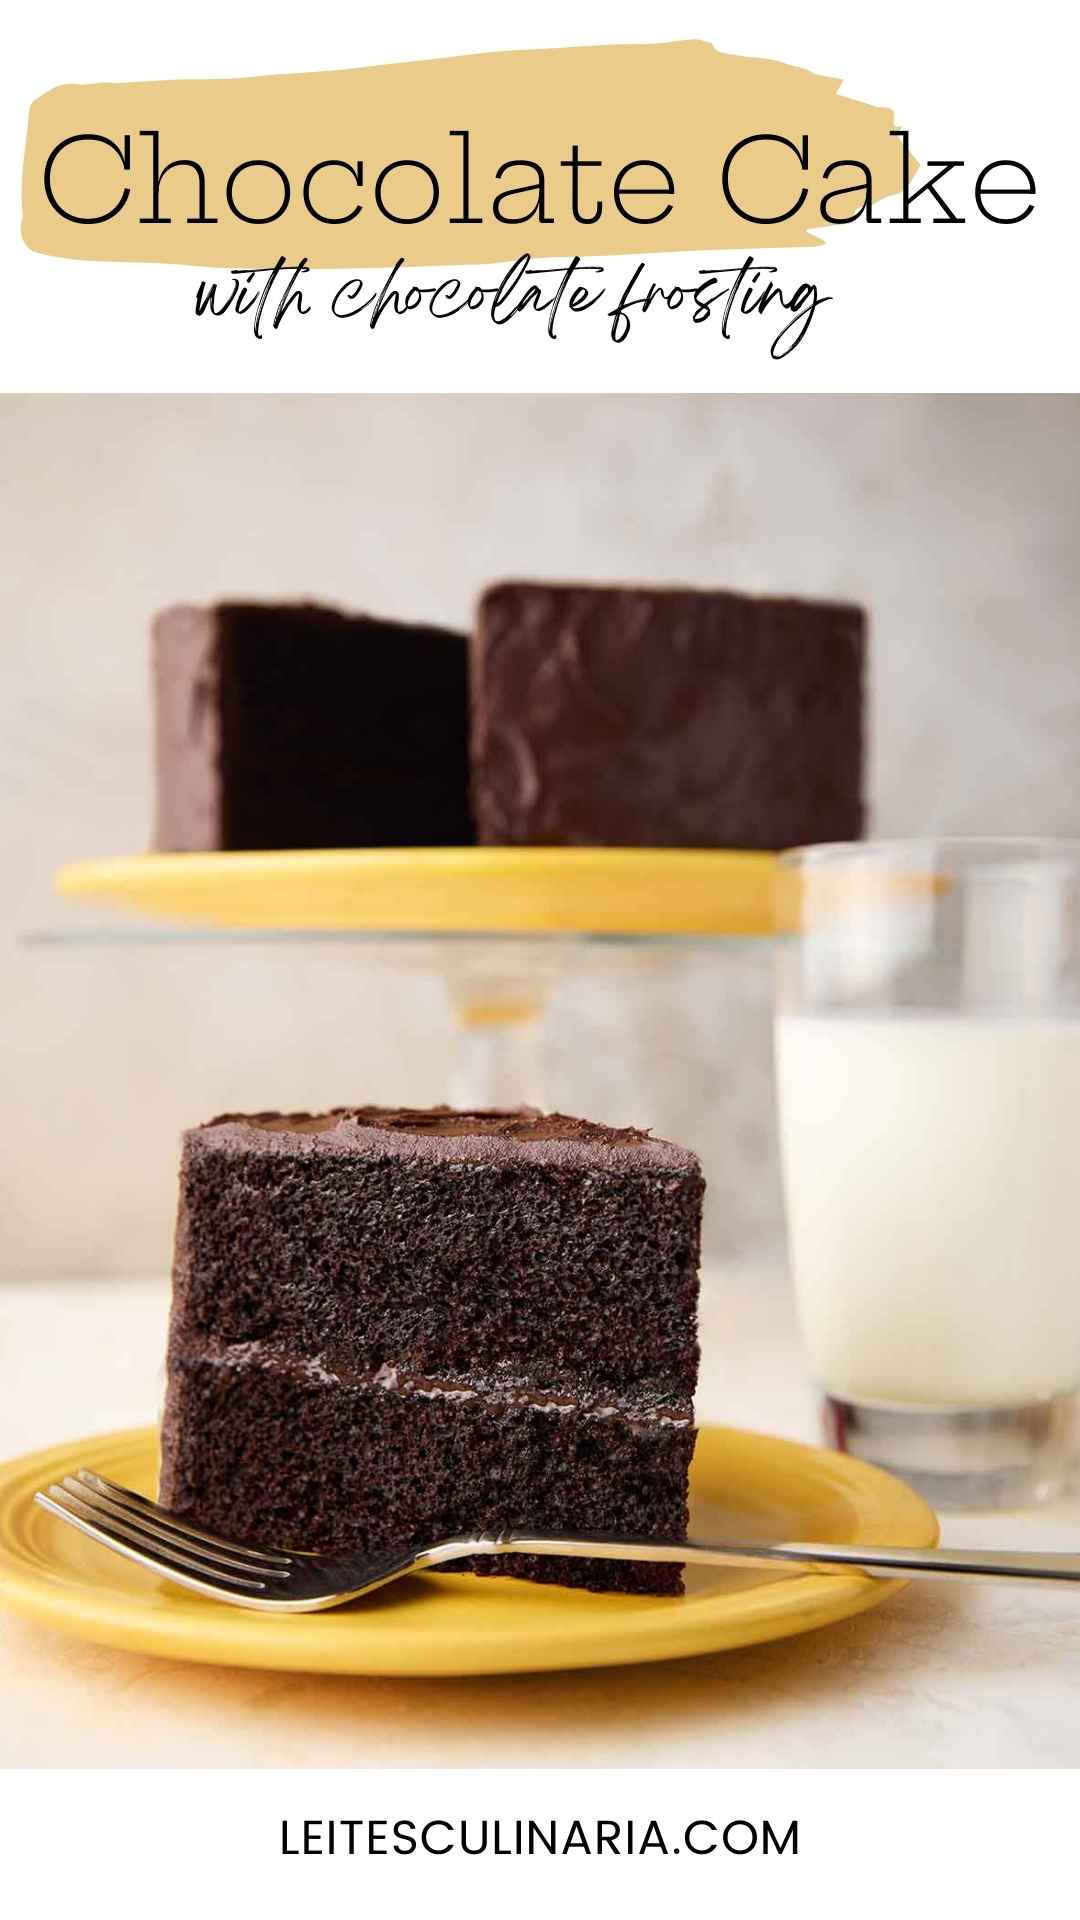 A slice of Hershey's chocolate cake with chocolate frosting on a yellow plate, with the remaining cake on a stand in the background.